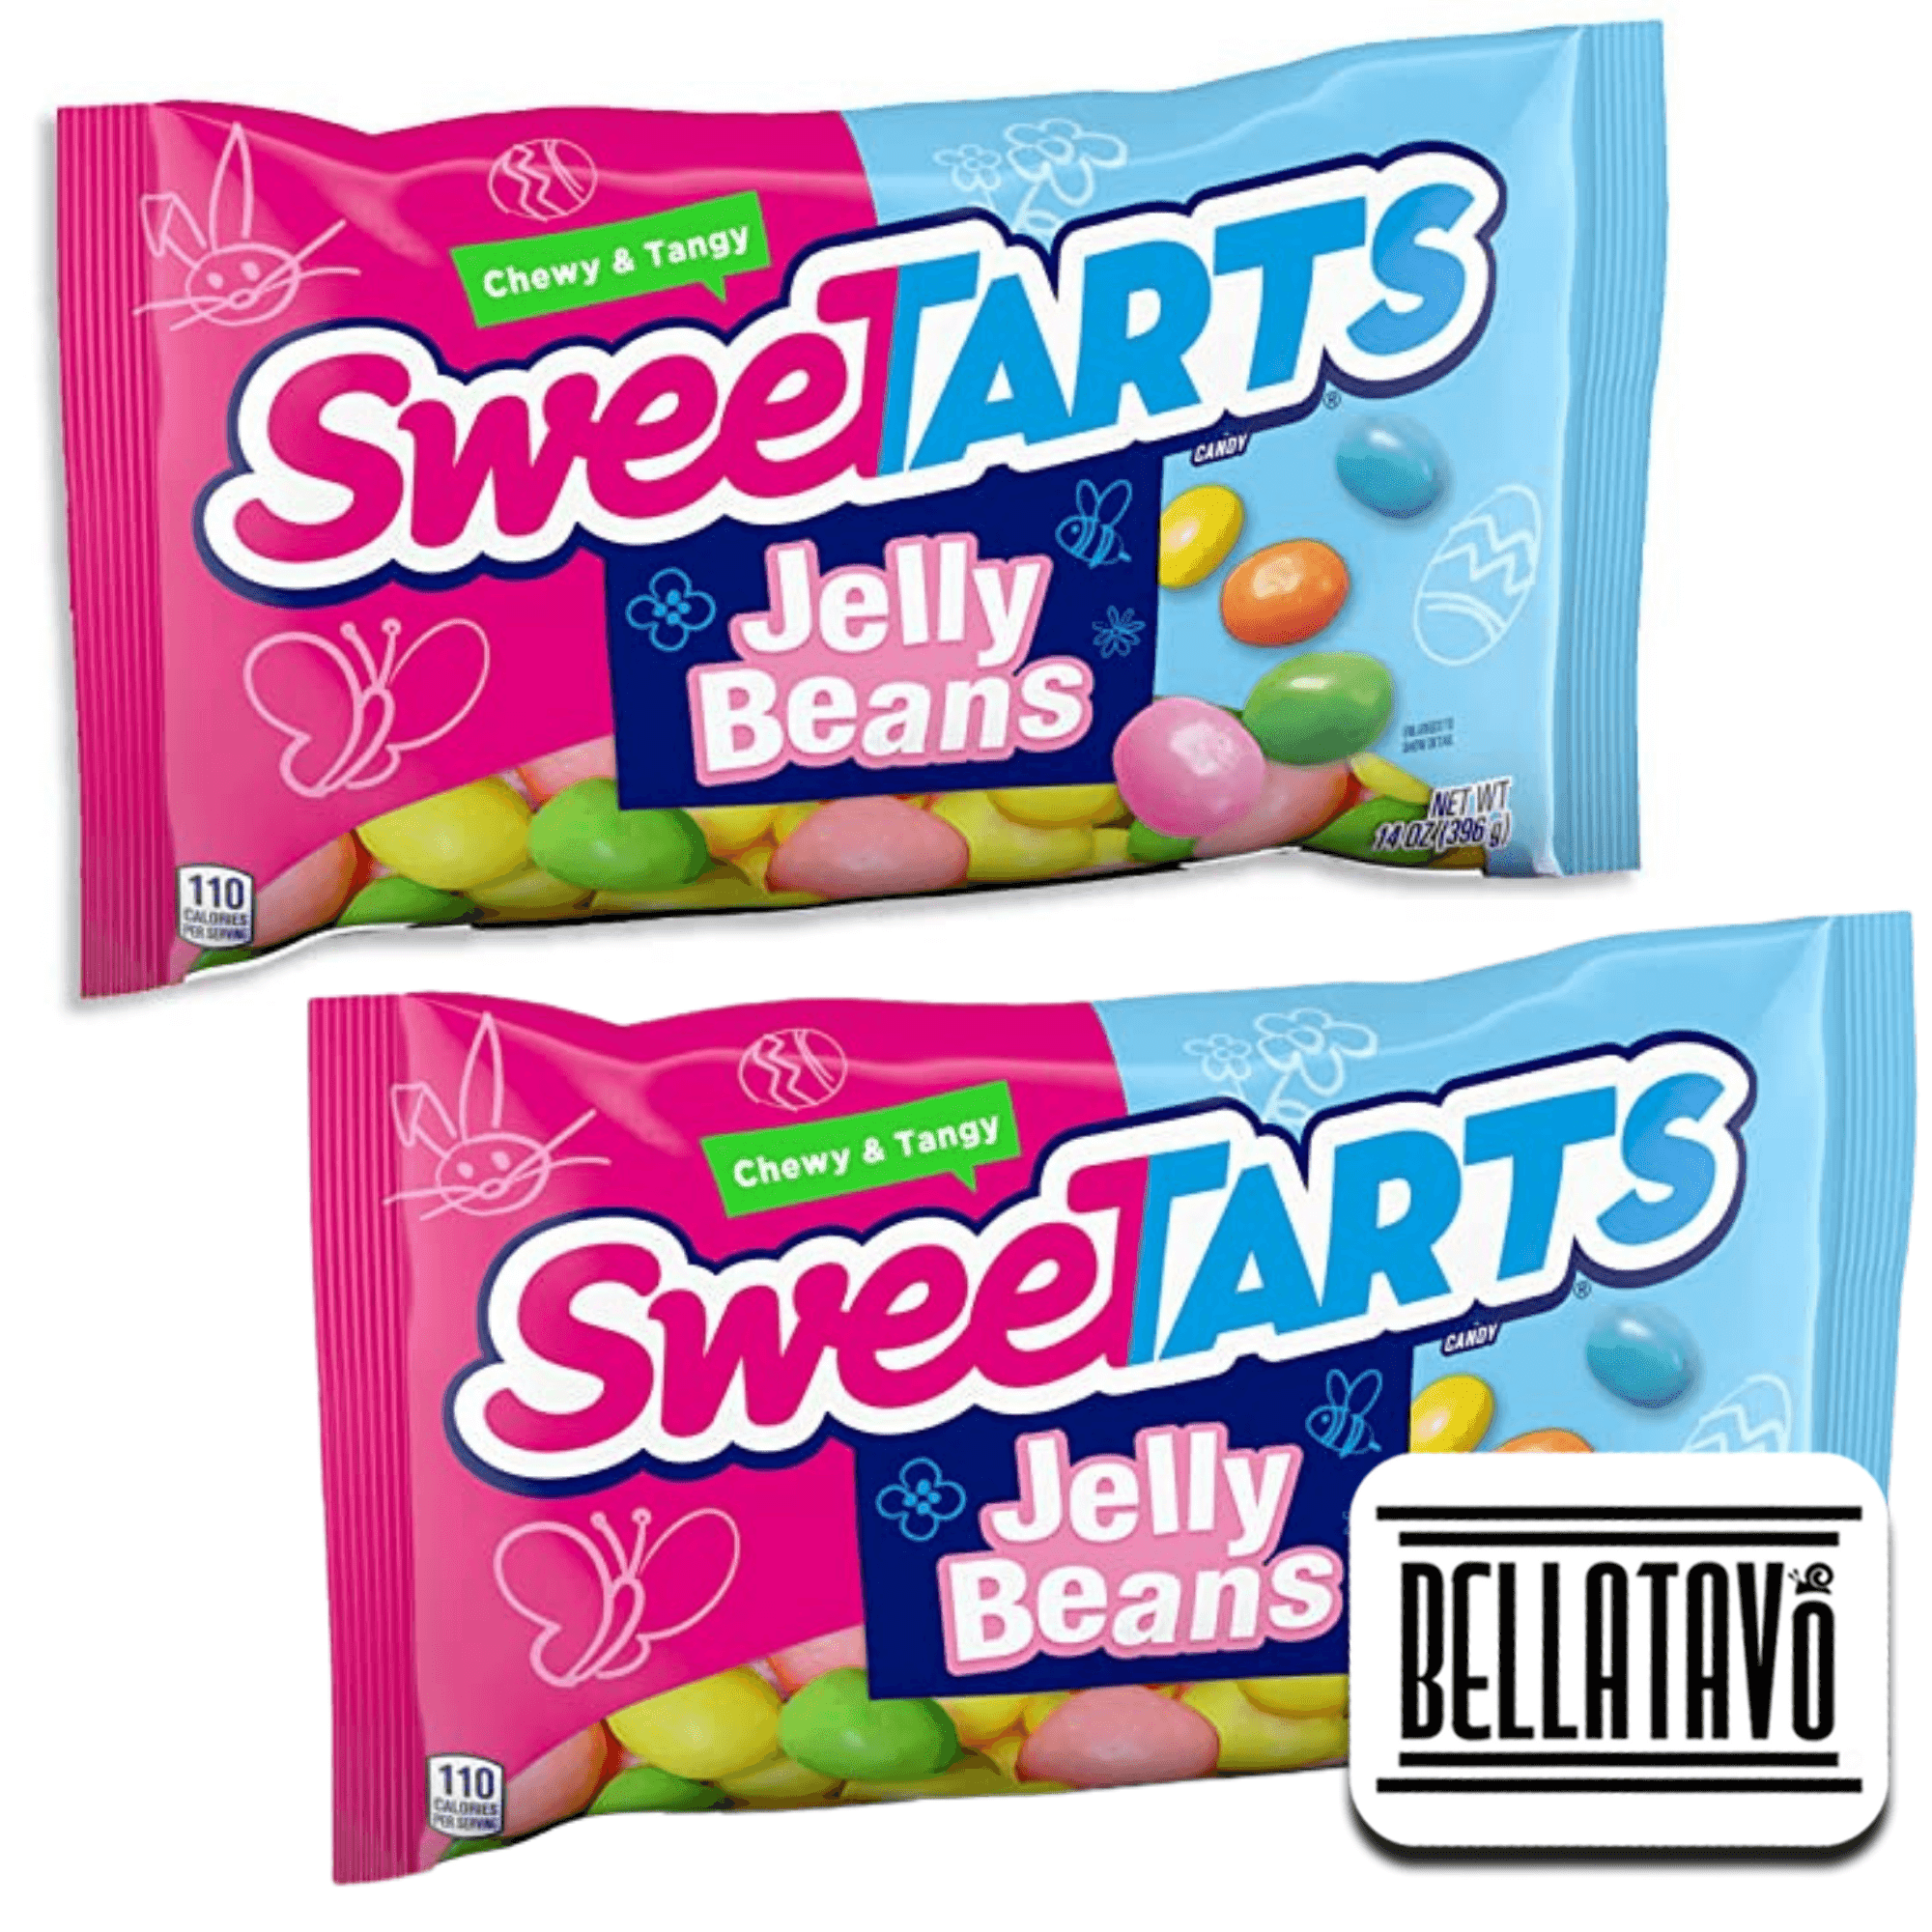 Easter Jelly Beans Bundle. Includes Two-14 Oz Bags of Sweetarts